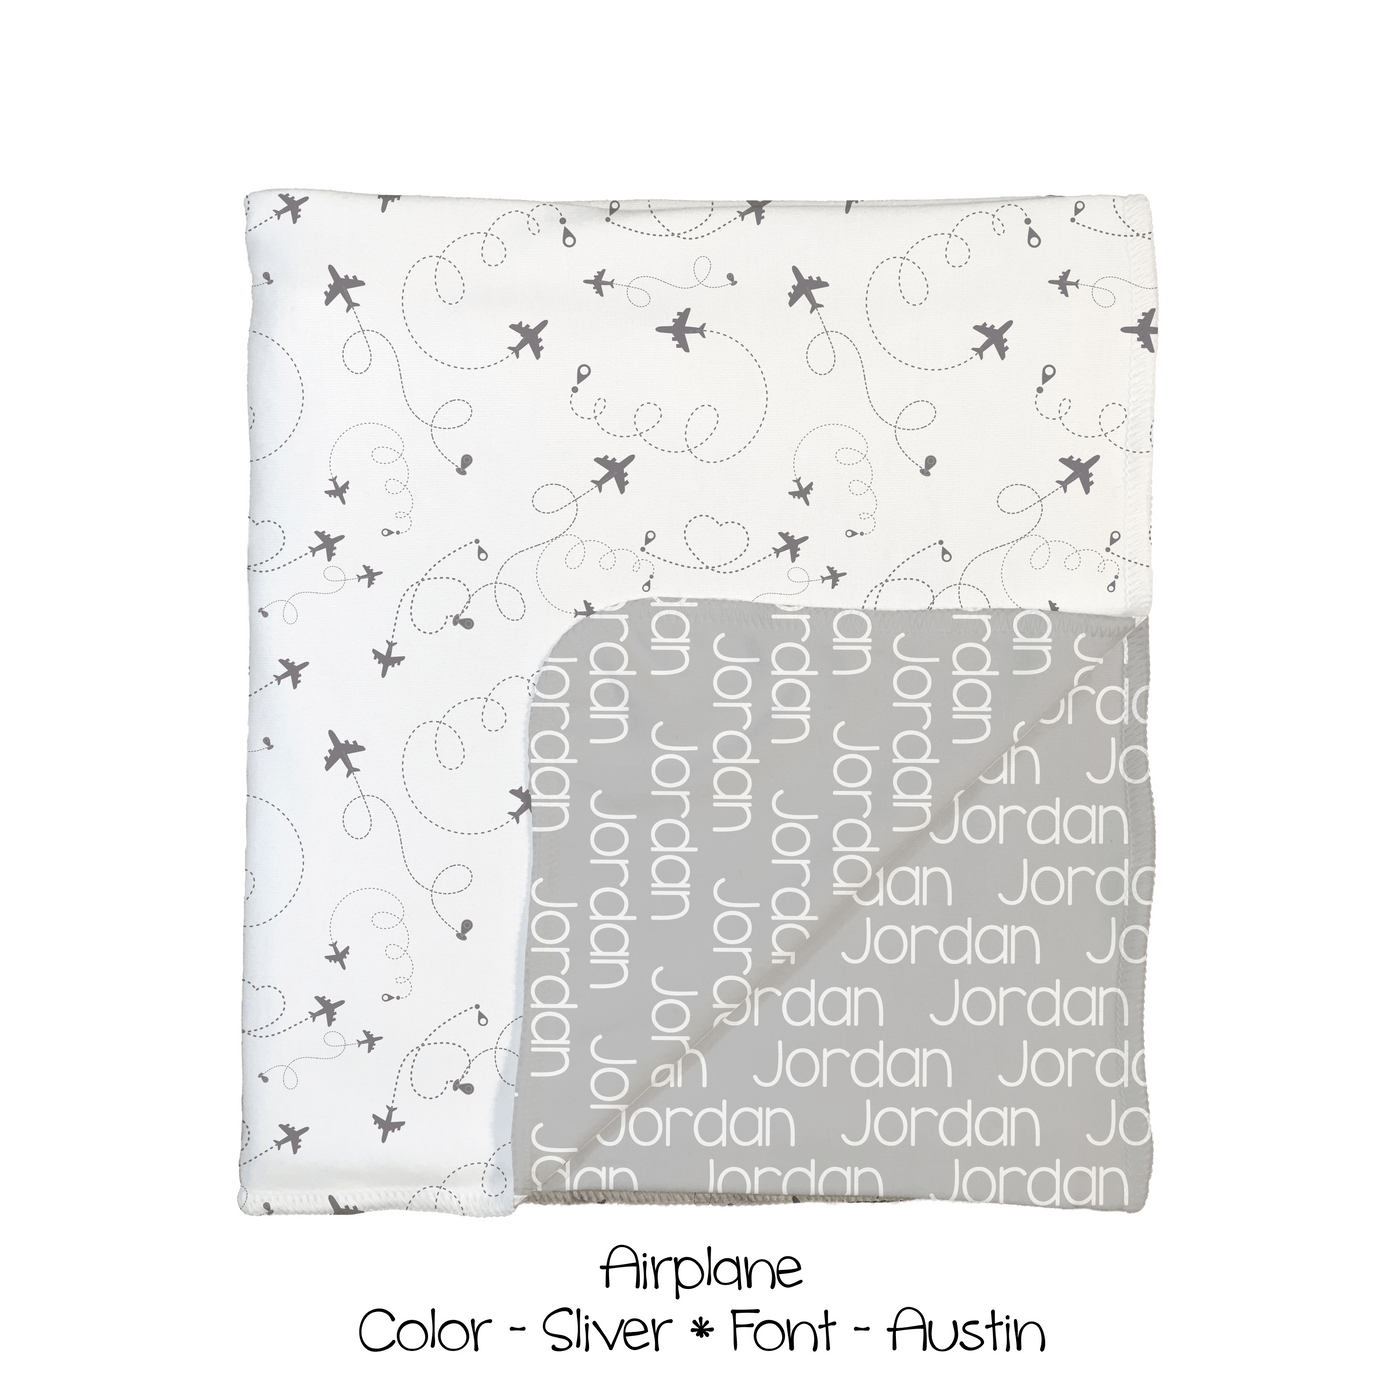 Airplane 2-Sided Swaddle